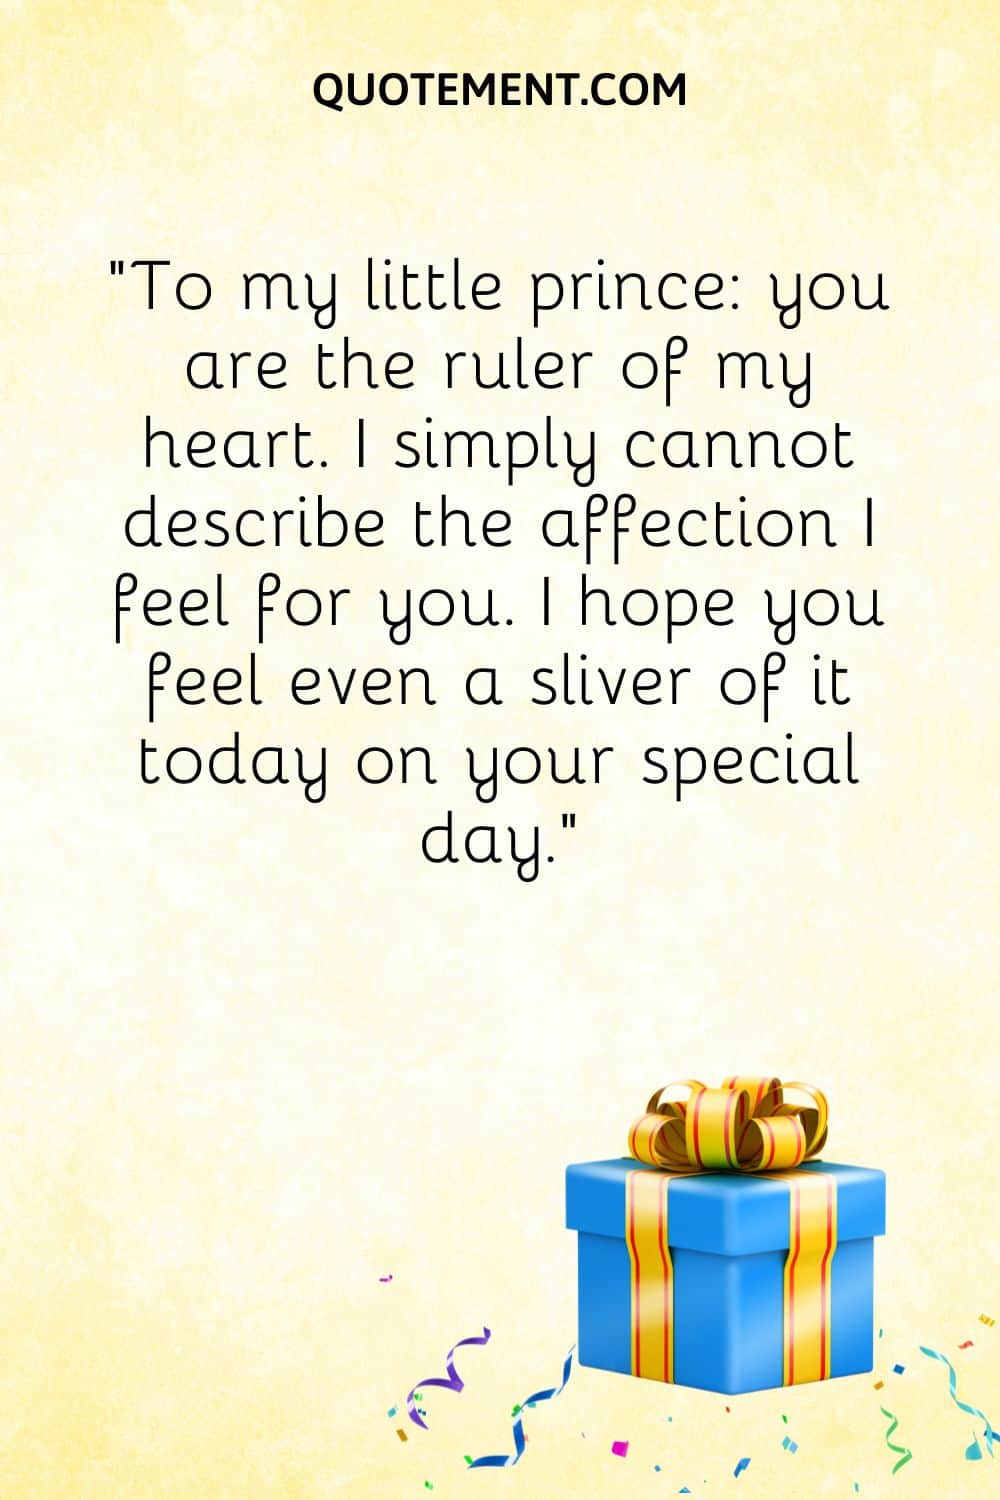 “To my little prince you are the ruler of my heart. I simply cannot describe the affection I feel for you. I hope you feel even a sliver of it today on your special day.”